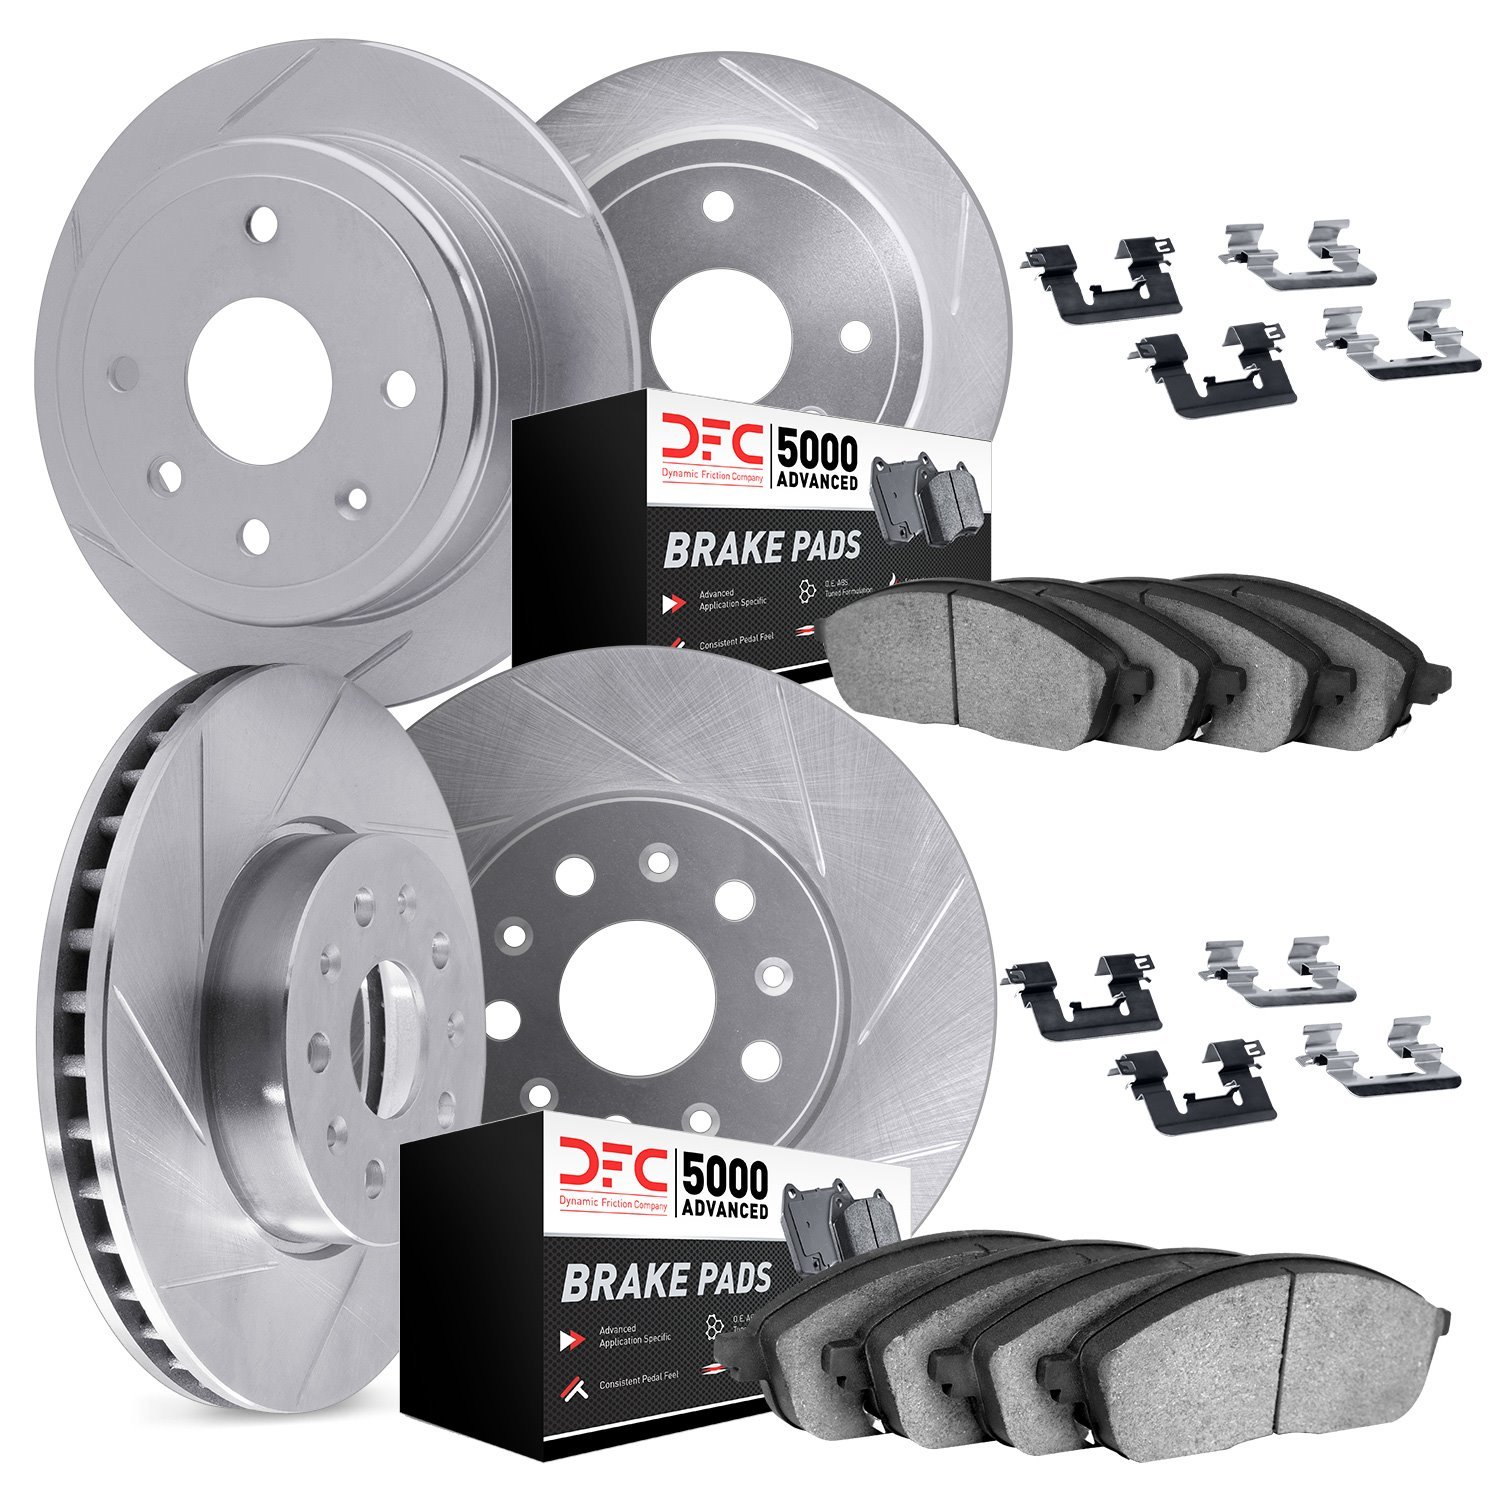 5514-58017 Slotted Brake Rotors w/5000 Advanced Brake Pads Kit & Hardware [Silver], 2013-2018 Acura/Honda, Position: Front and R